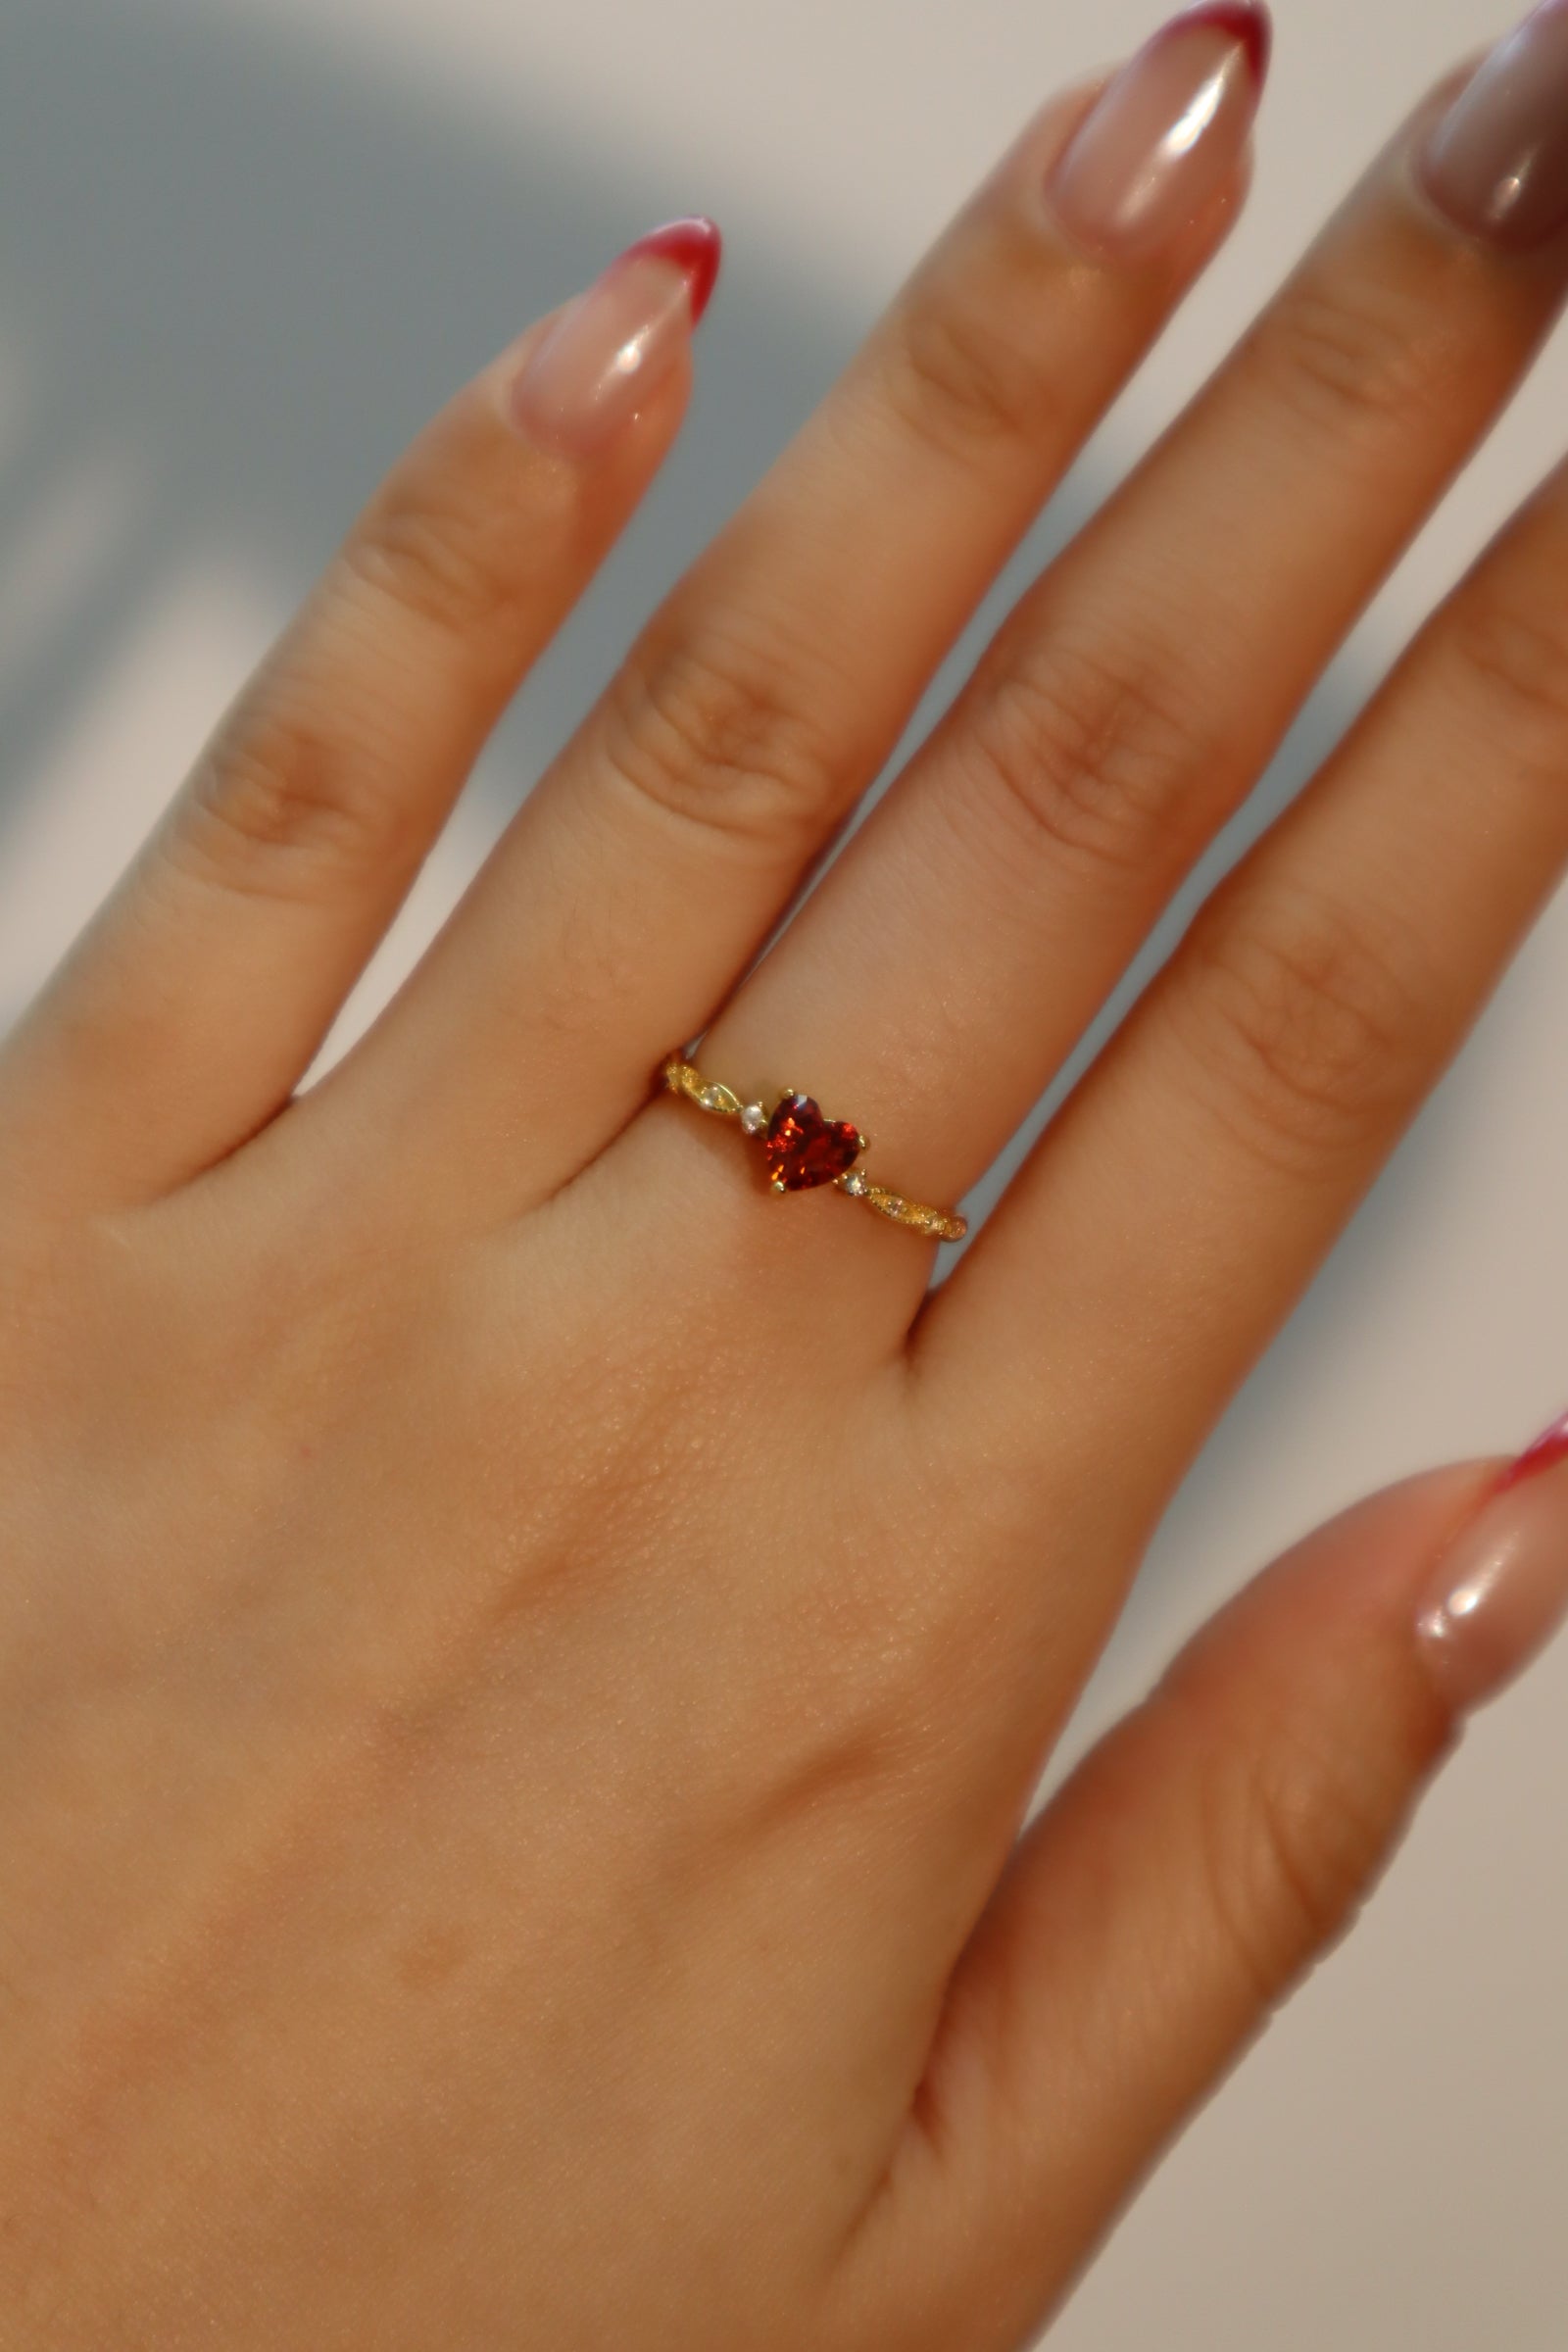 Red Heart Crystal Dainty Red Stone Thumb Romantic Love 18k Gold Plated  Adjustable Ring Jewelry, Gift for Her, Christmas Gift - Etsy | Love ring,  Gold heart ring, Jewelry